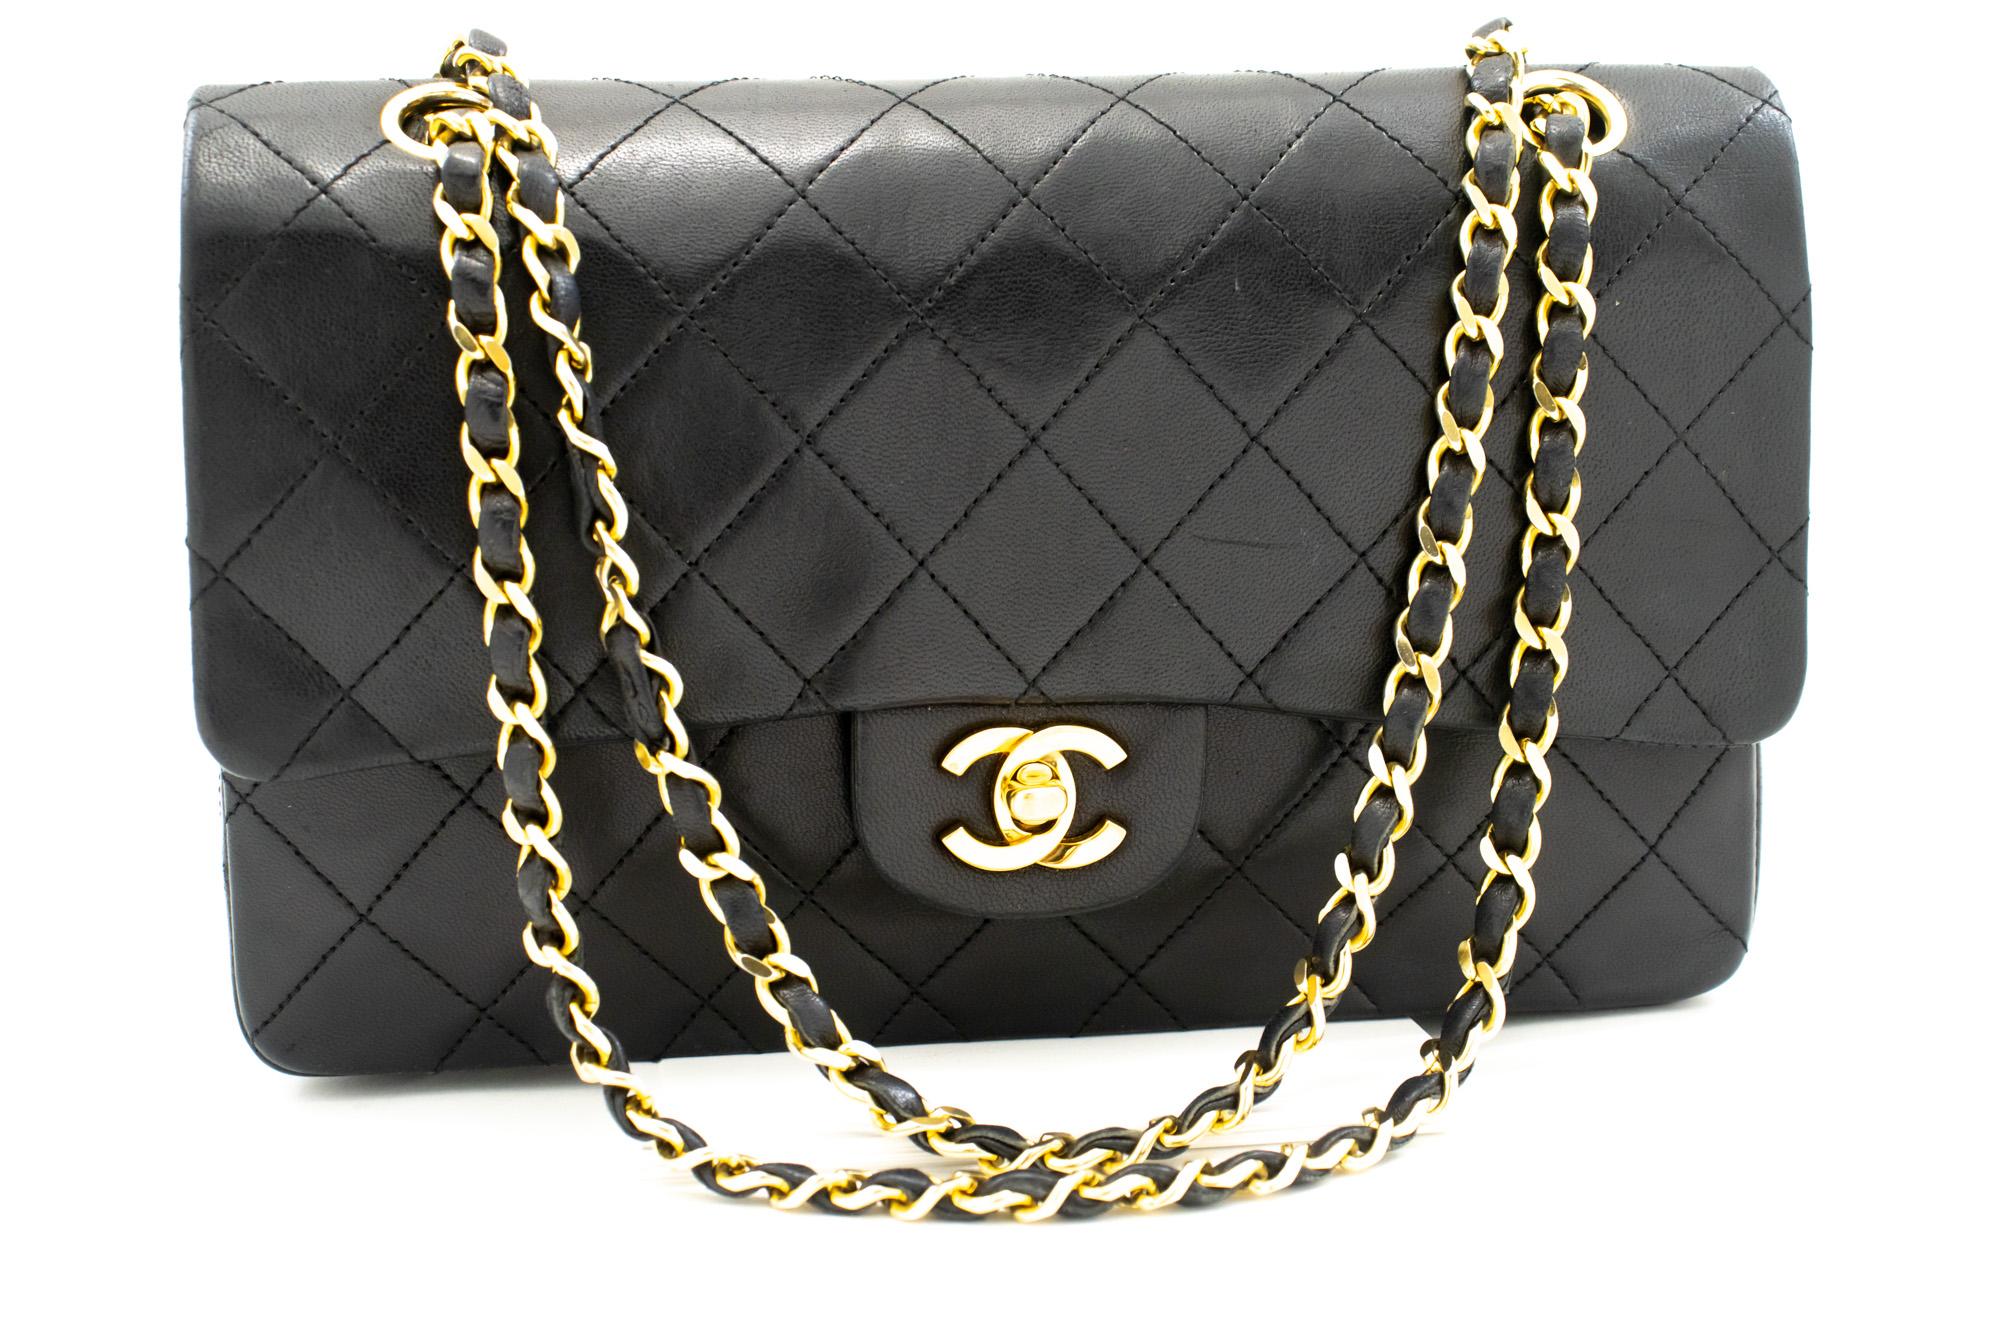 An authentic CHANEL Classic Double Flap Medium Chain Shoulder Bag Black Lamb. The color is Black. The outside material is Leather. The pattern is Solid. This item is Vintage / Classic. The year of manufacture would be 1986-1988.
Conditions &